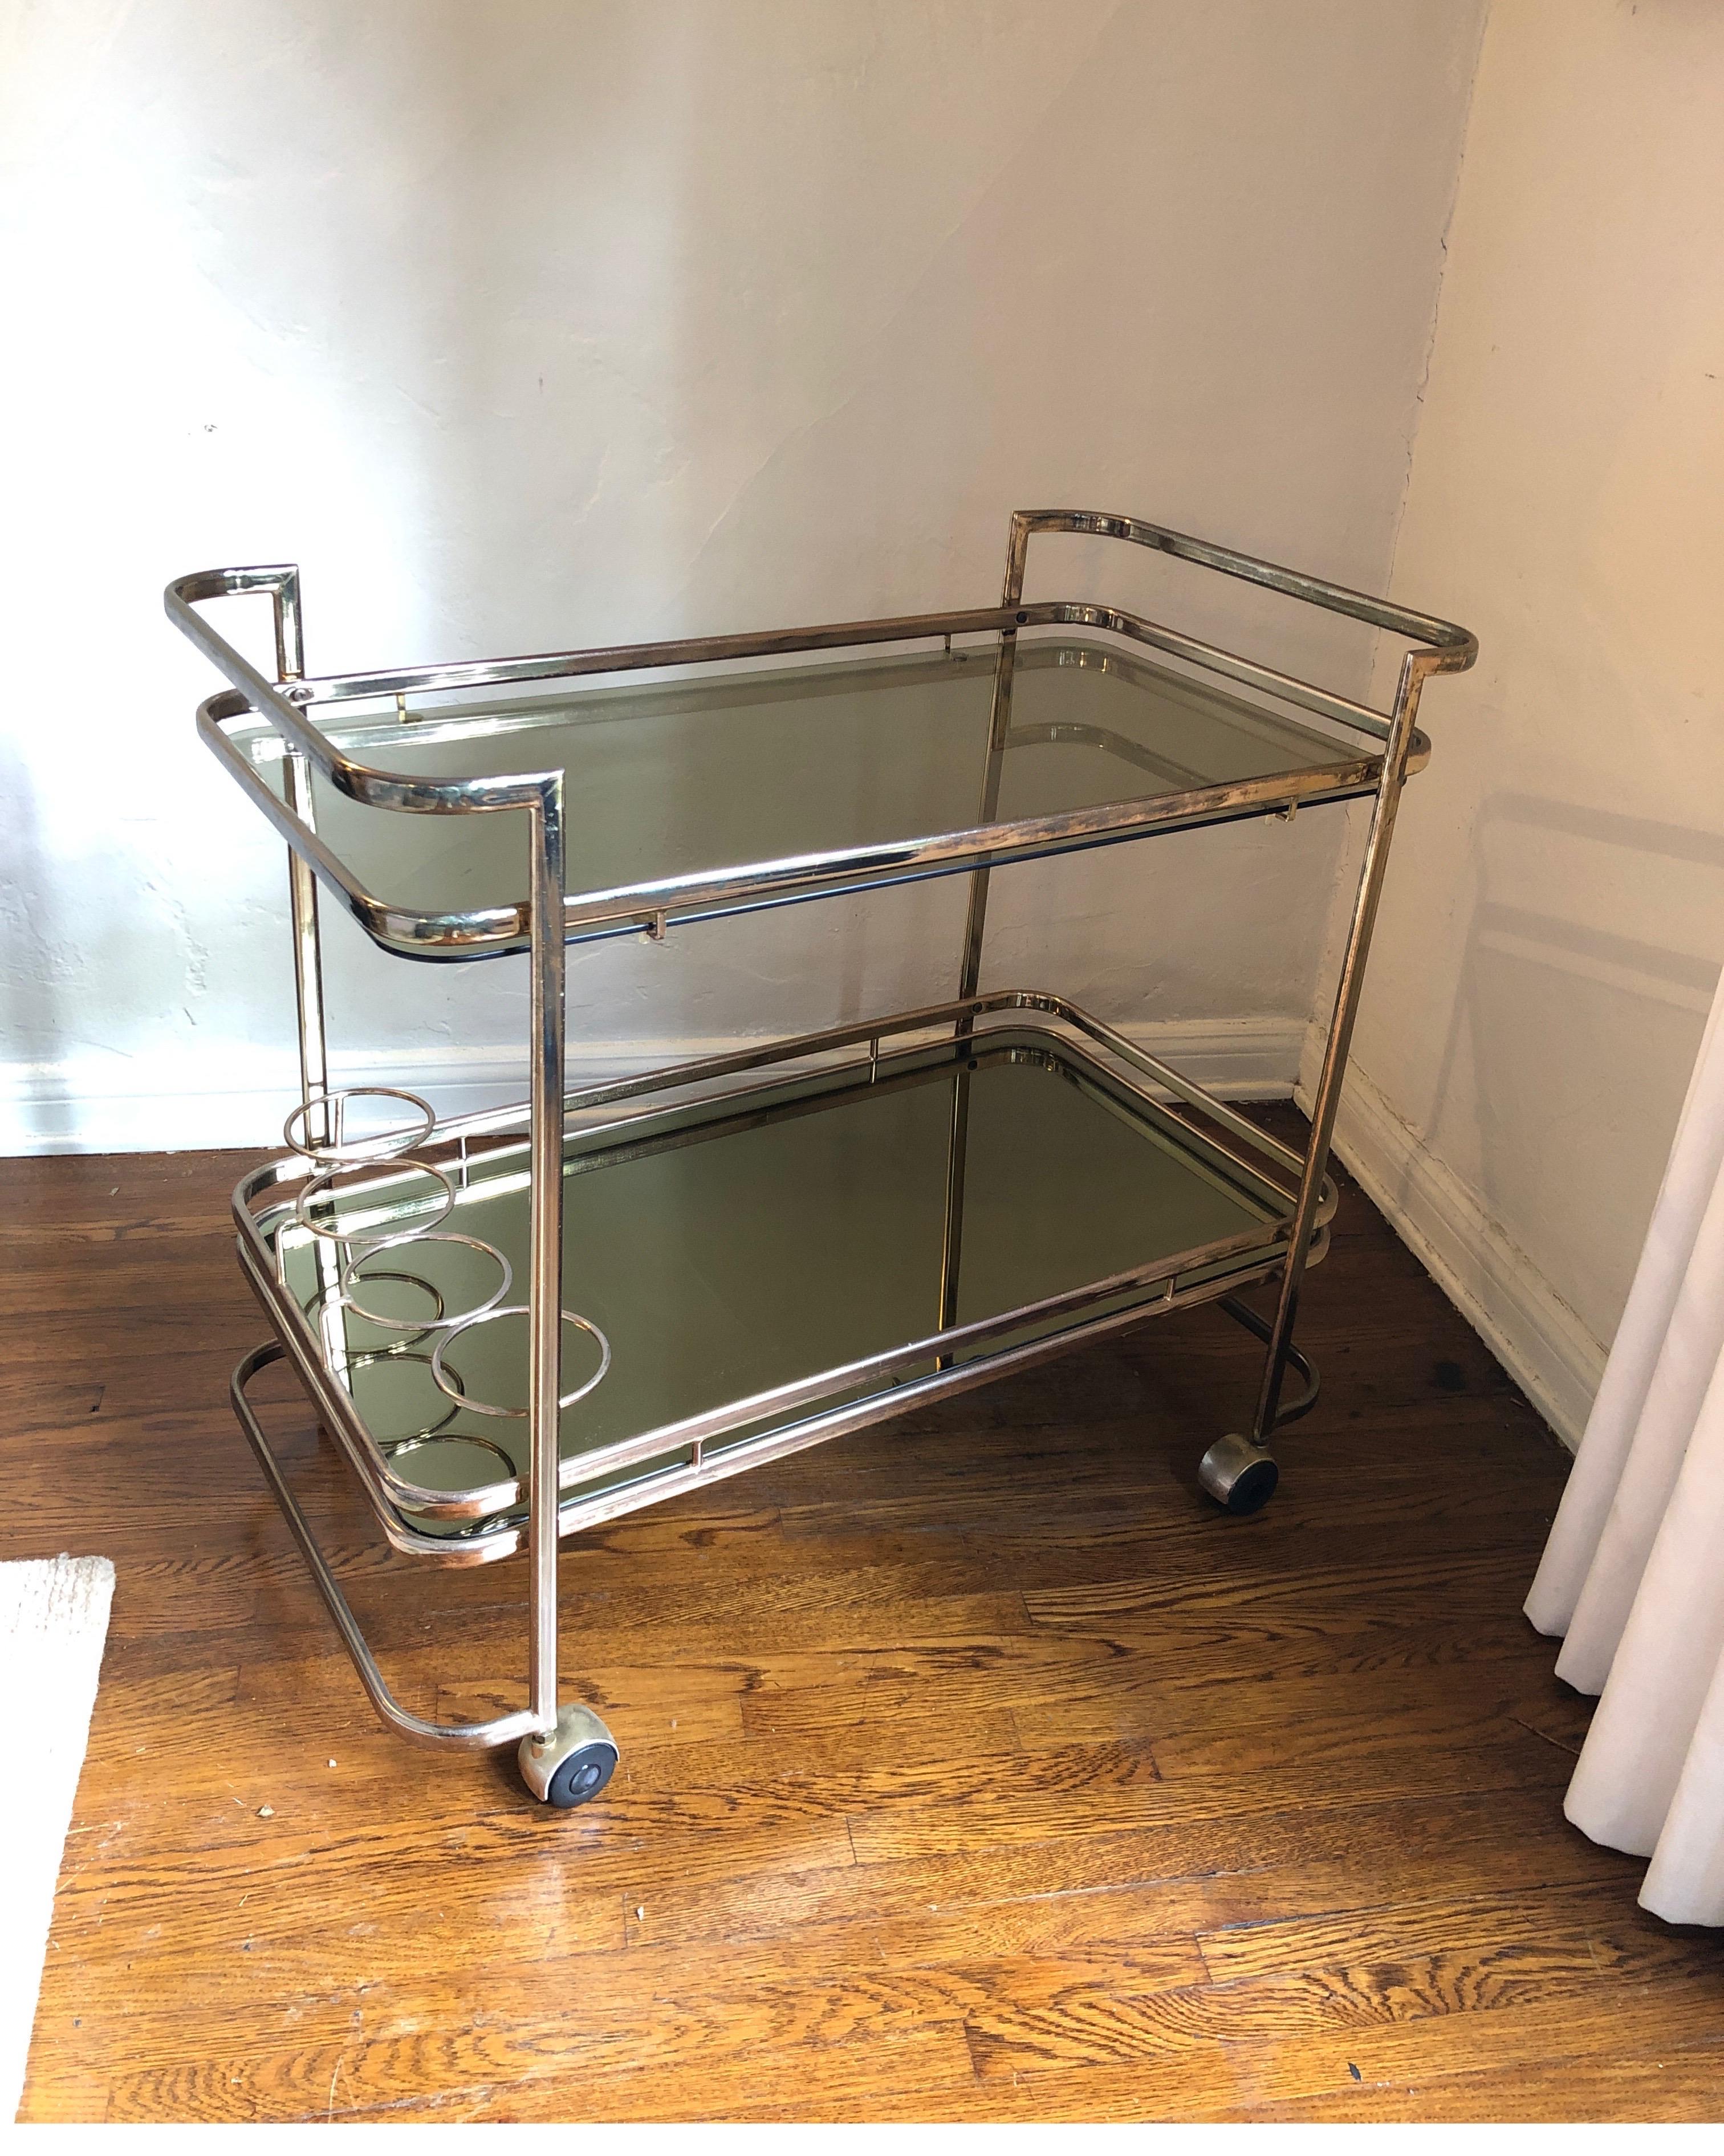 Mid-Century Modern/Hollywood Regency two-tiered brass bar cart with smoked glass top and smoked mirror bottom shelf. 
Sleek Art Deco lines. Glass and mirror both have a gold undertone tint.
Bottom part has holder for 4 bottles/mixers. 

All wheels